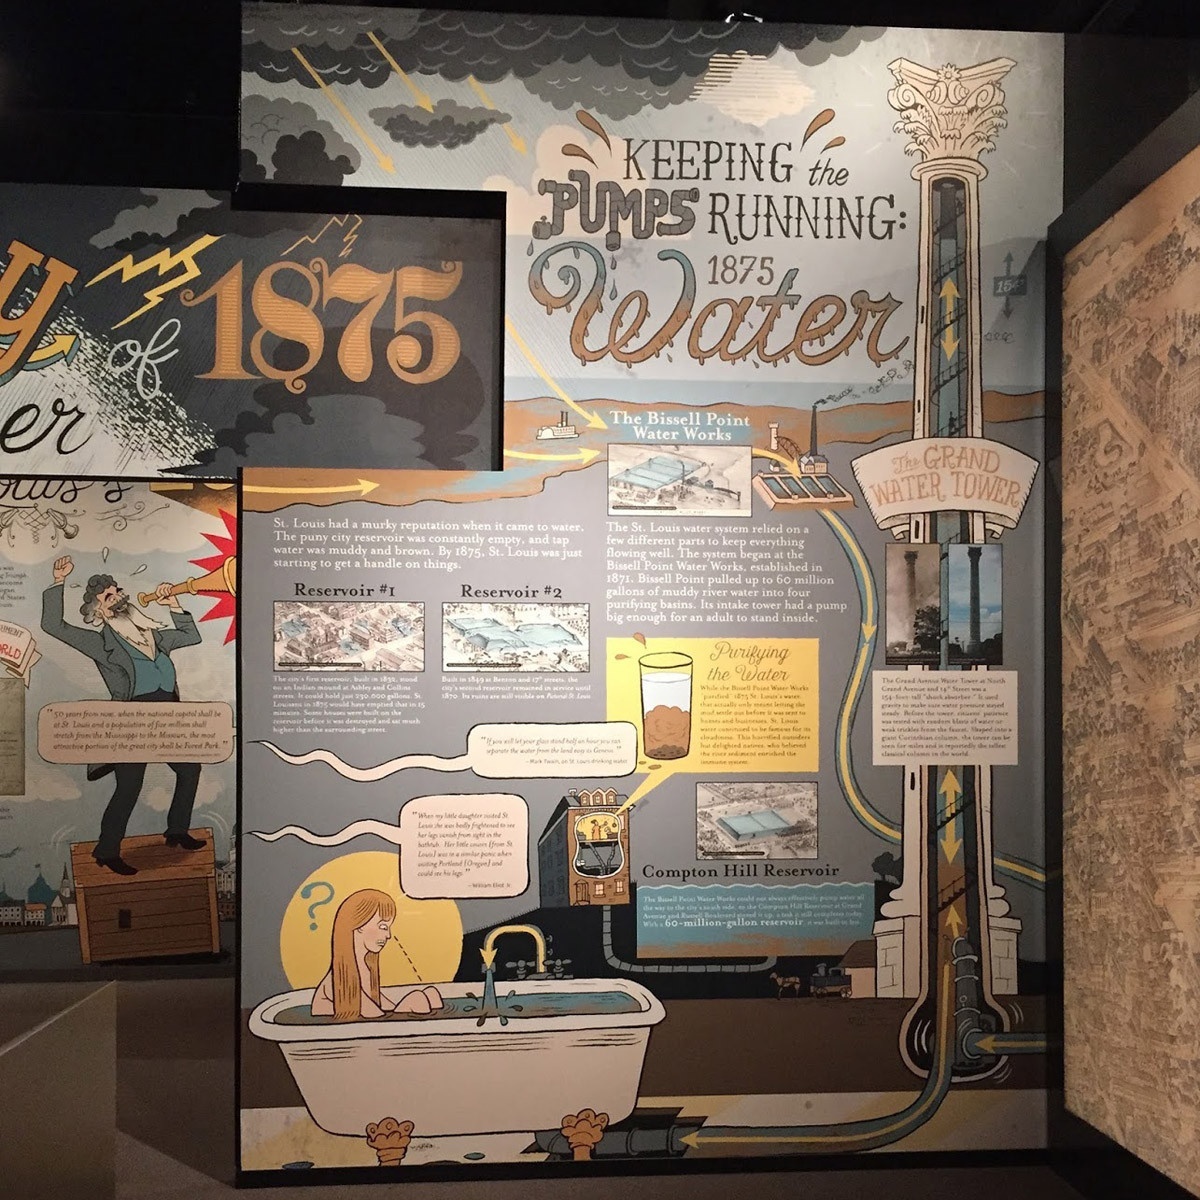 Installation view of two walls; the one in the middle of the image contains a large-scale illustration of a narrative, with the hand-lettered text "KEEPING the PUMPS RUNNING" — "1875 Water" in the center; what follows are several paragraphs of text interspersed with some larger illustrations. The wall to the right contains an illustration of (what appears to be) a cityscape.